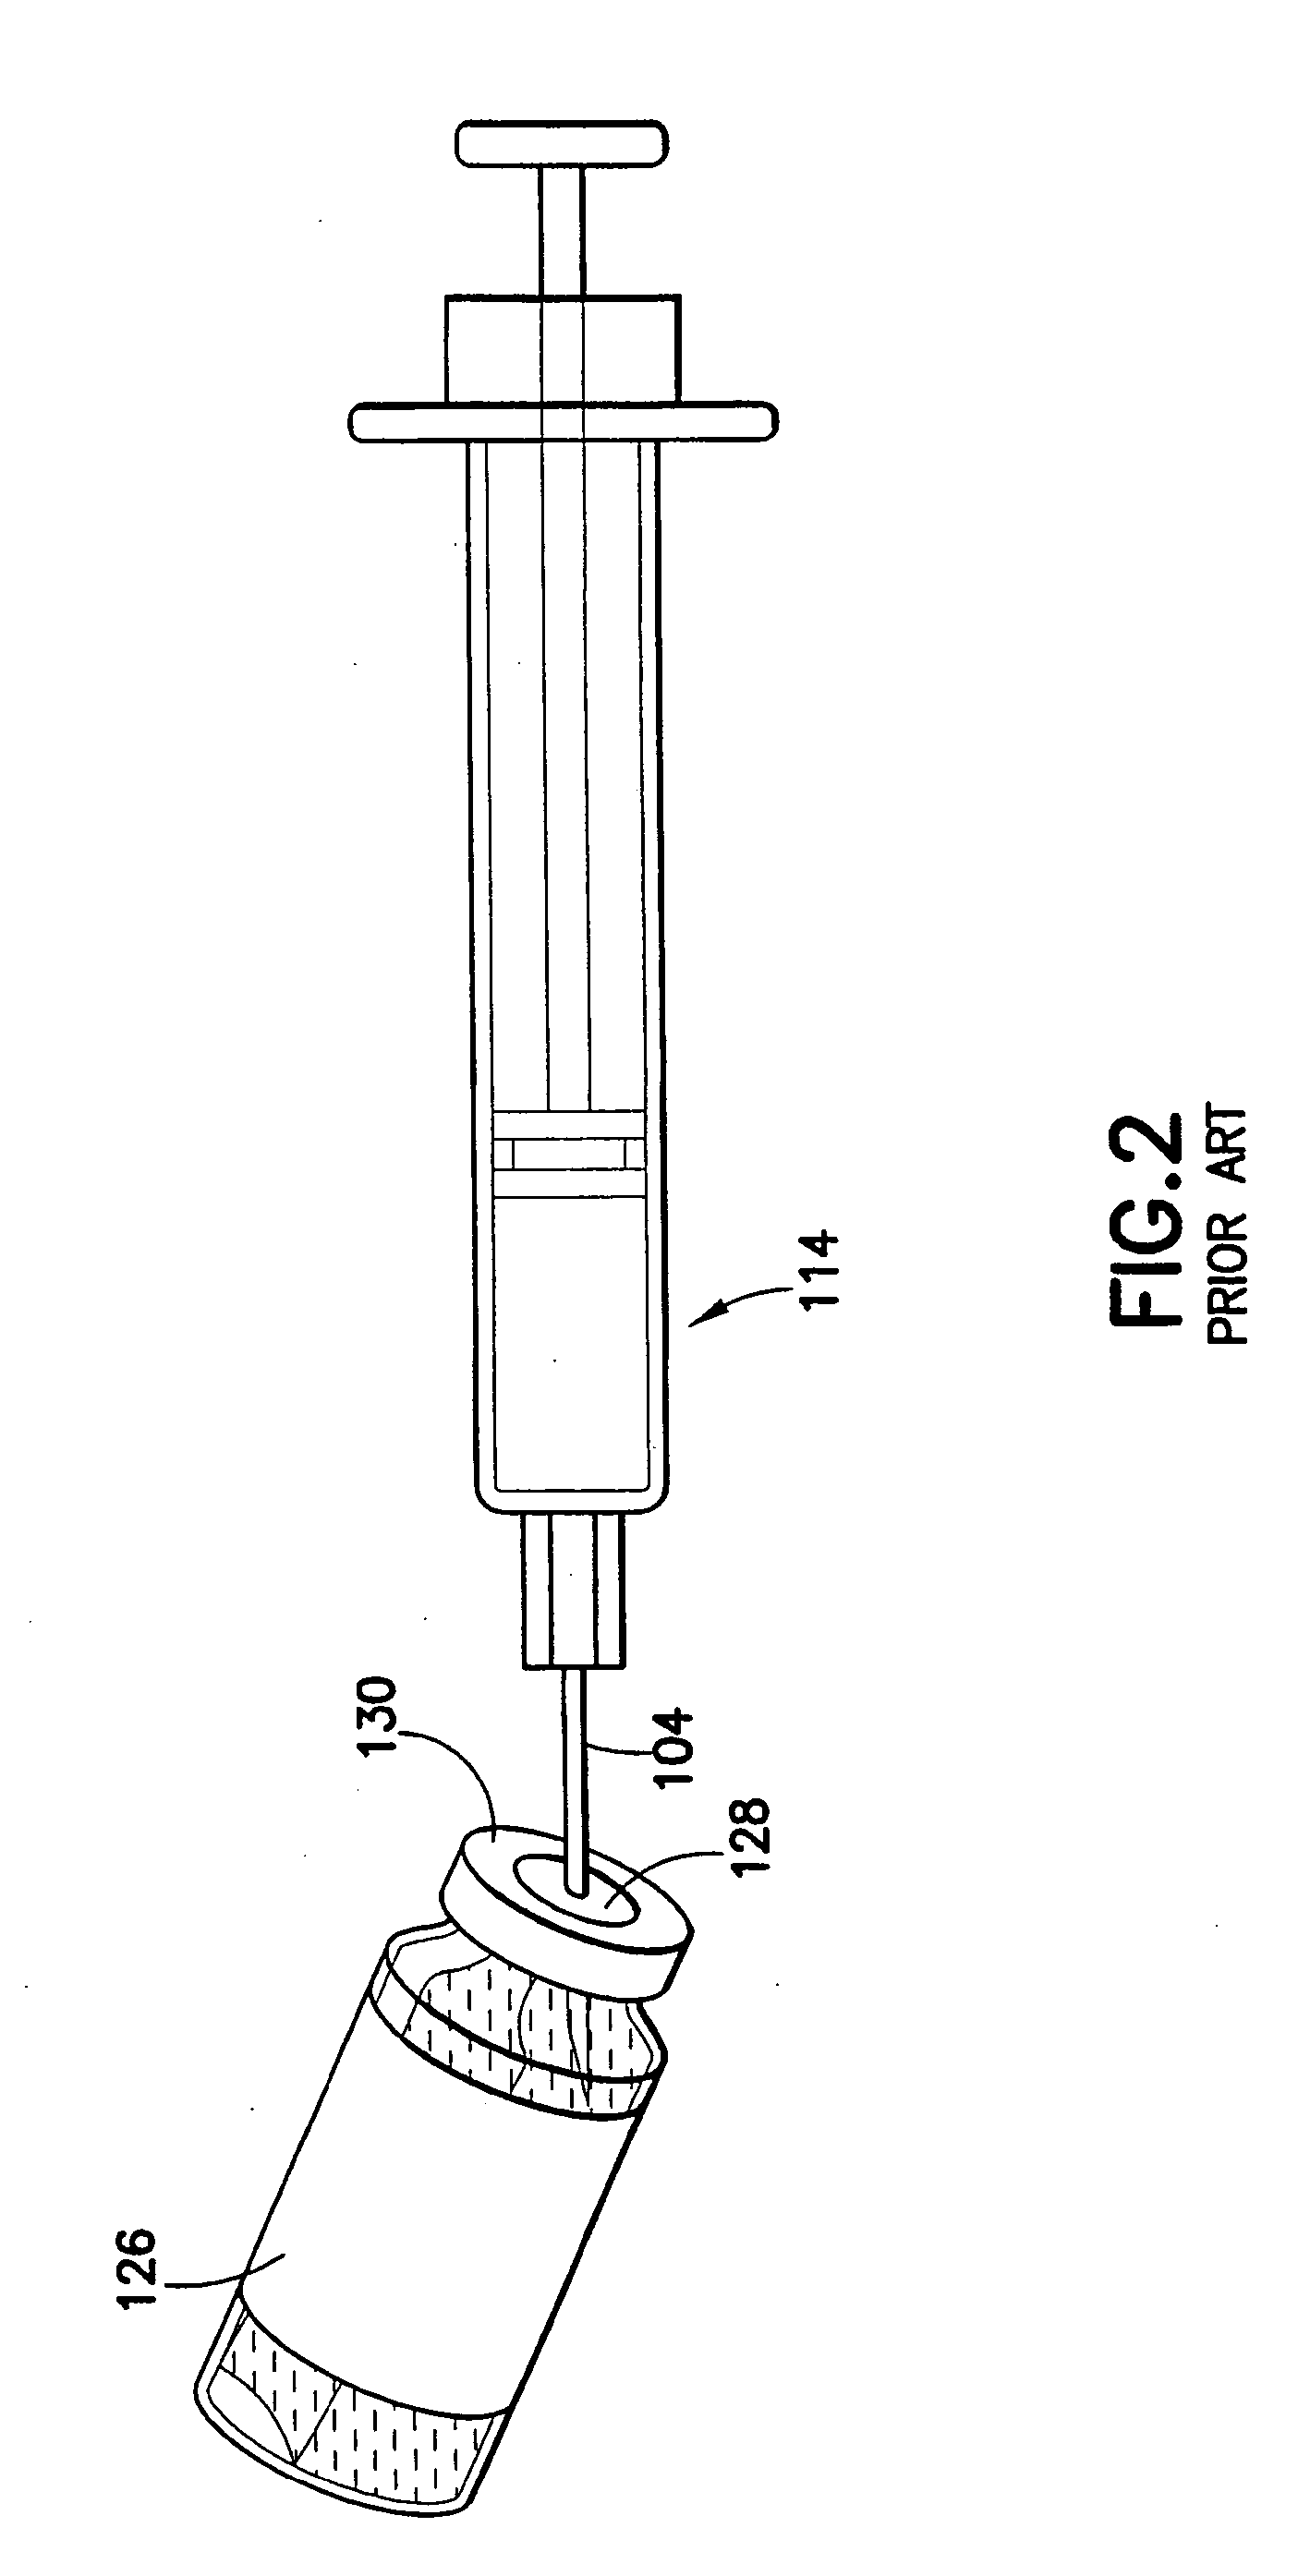 Intradermal syringe and needle assembly